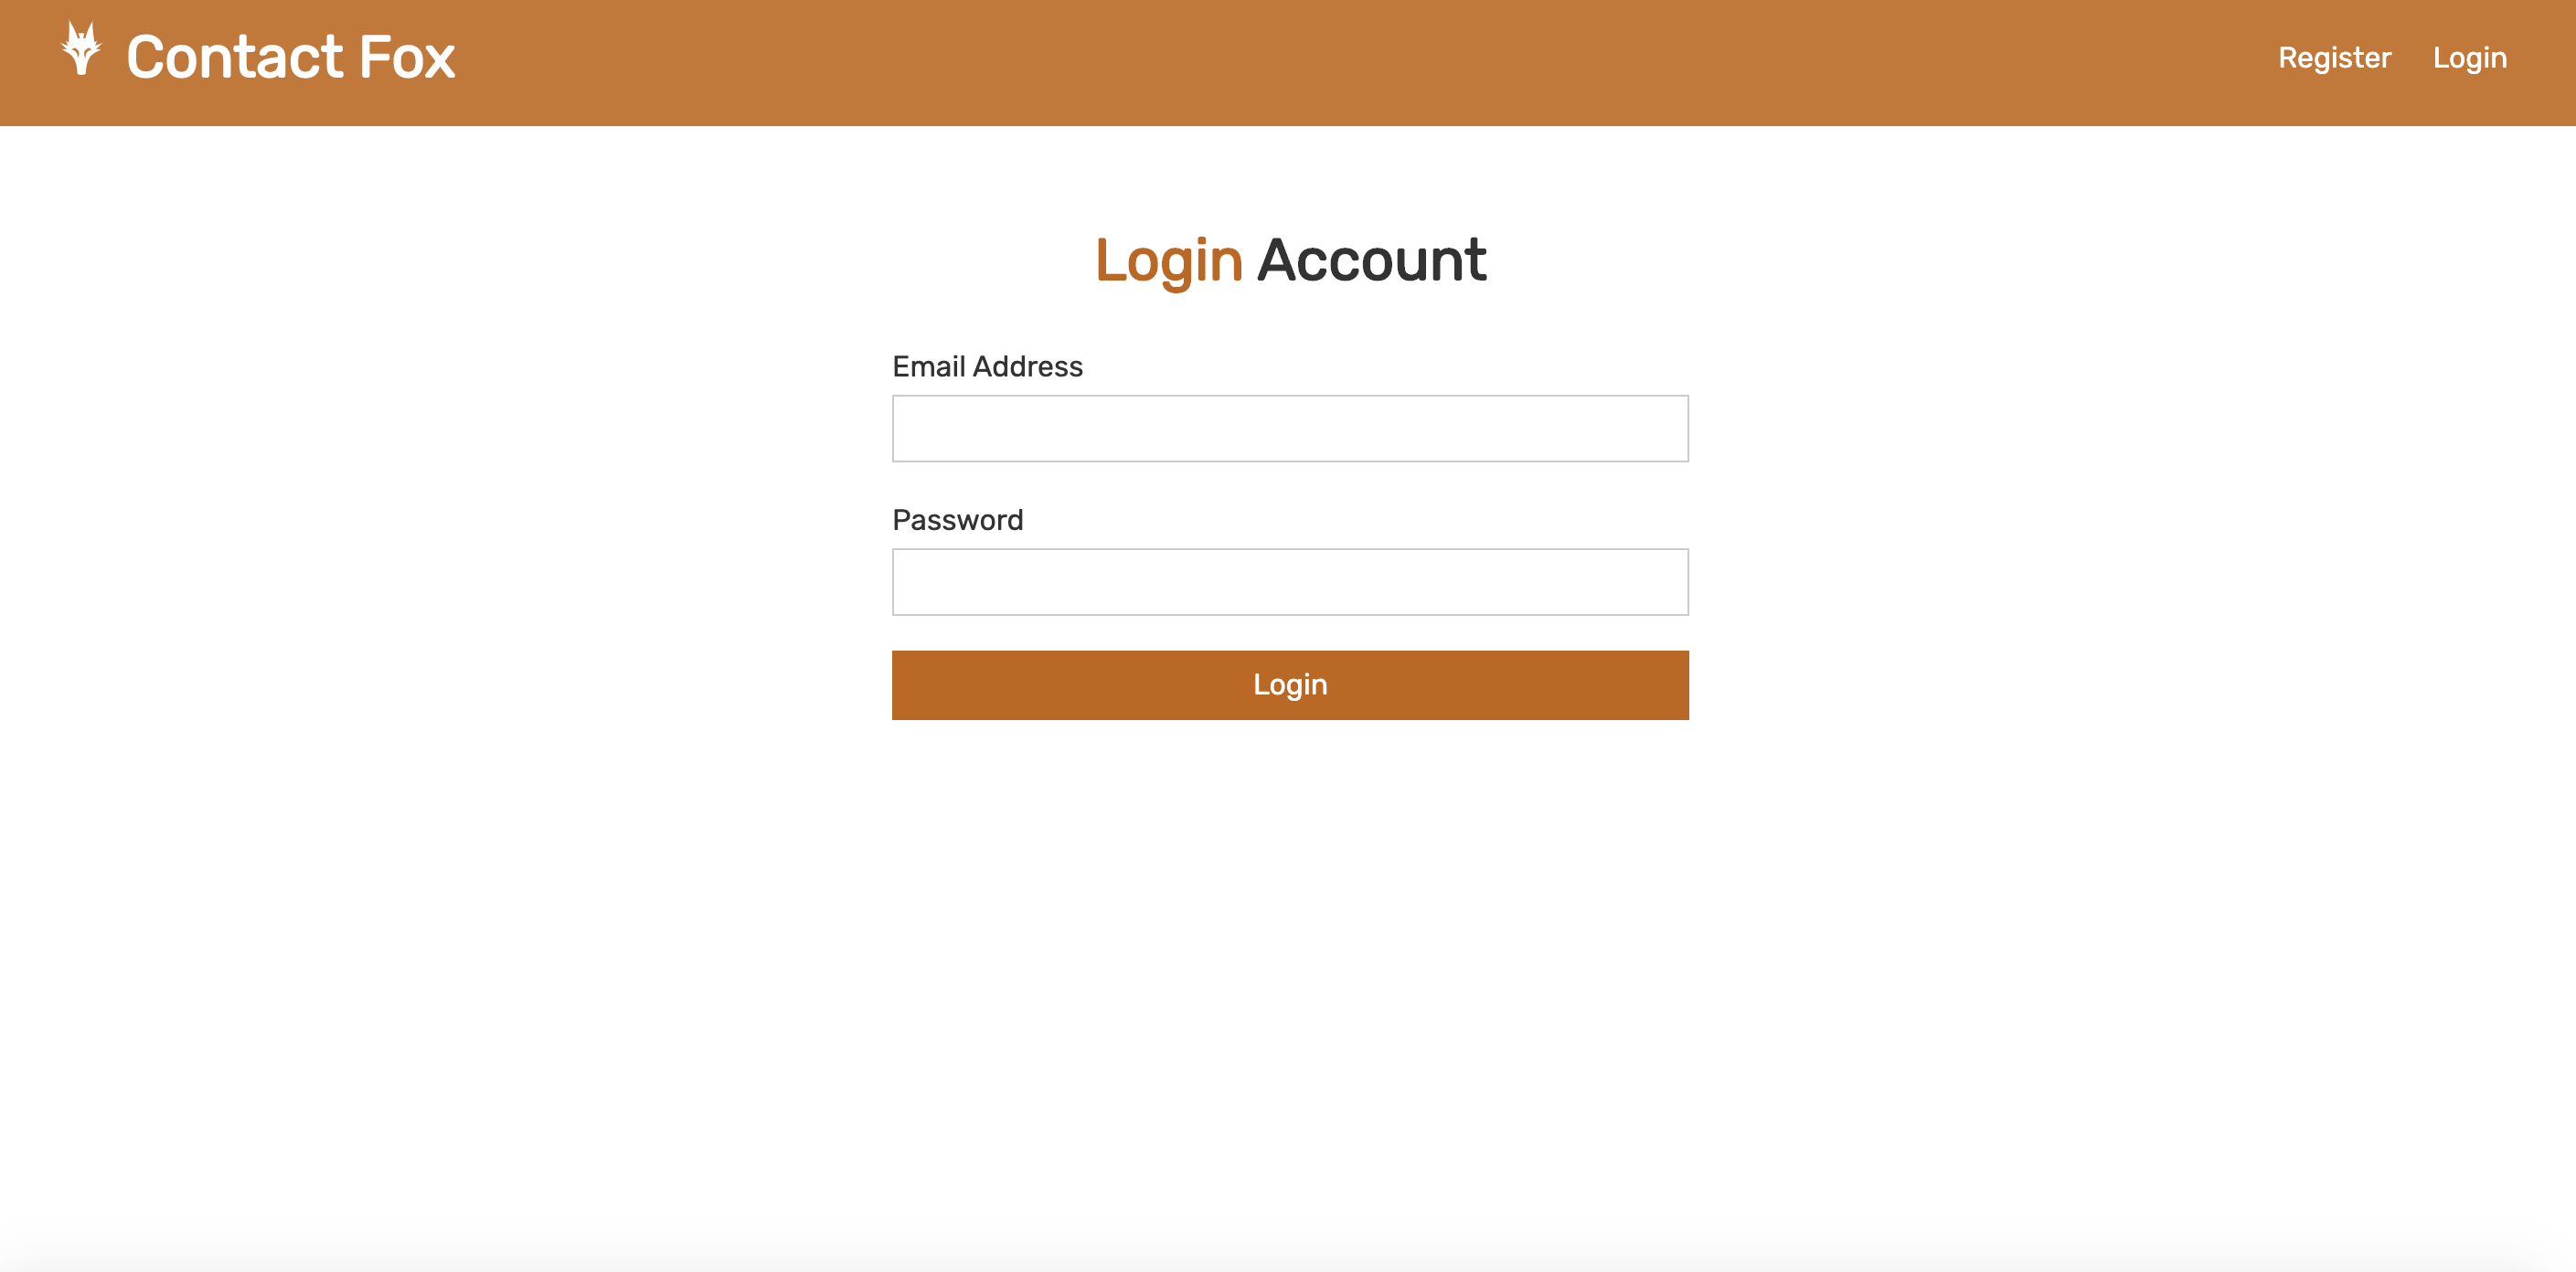 Contact Fox Login Page